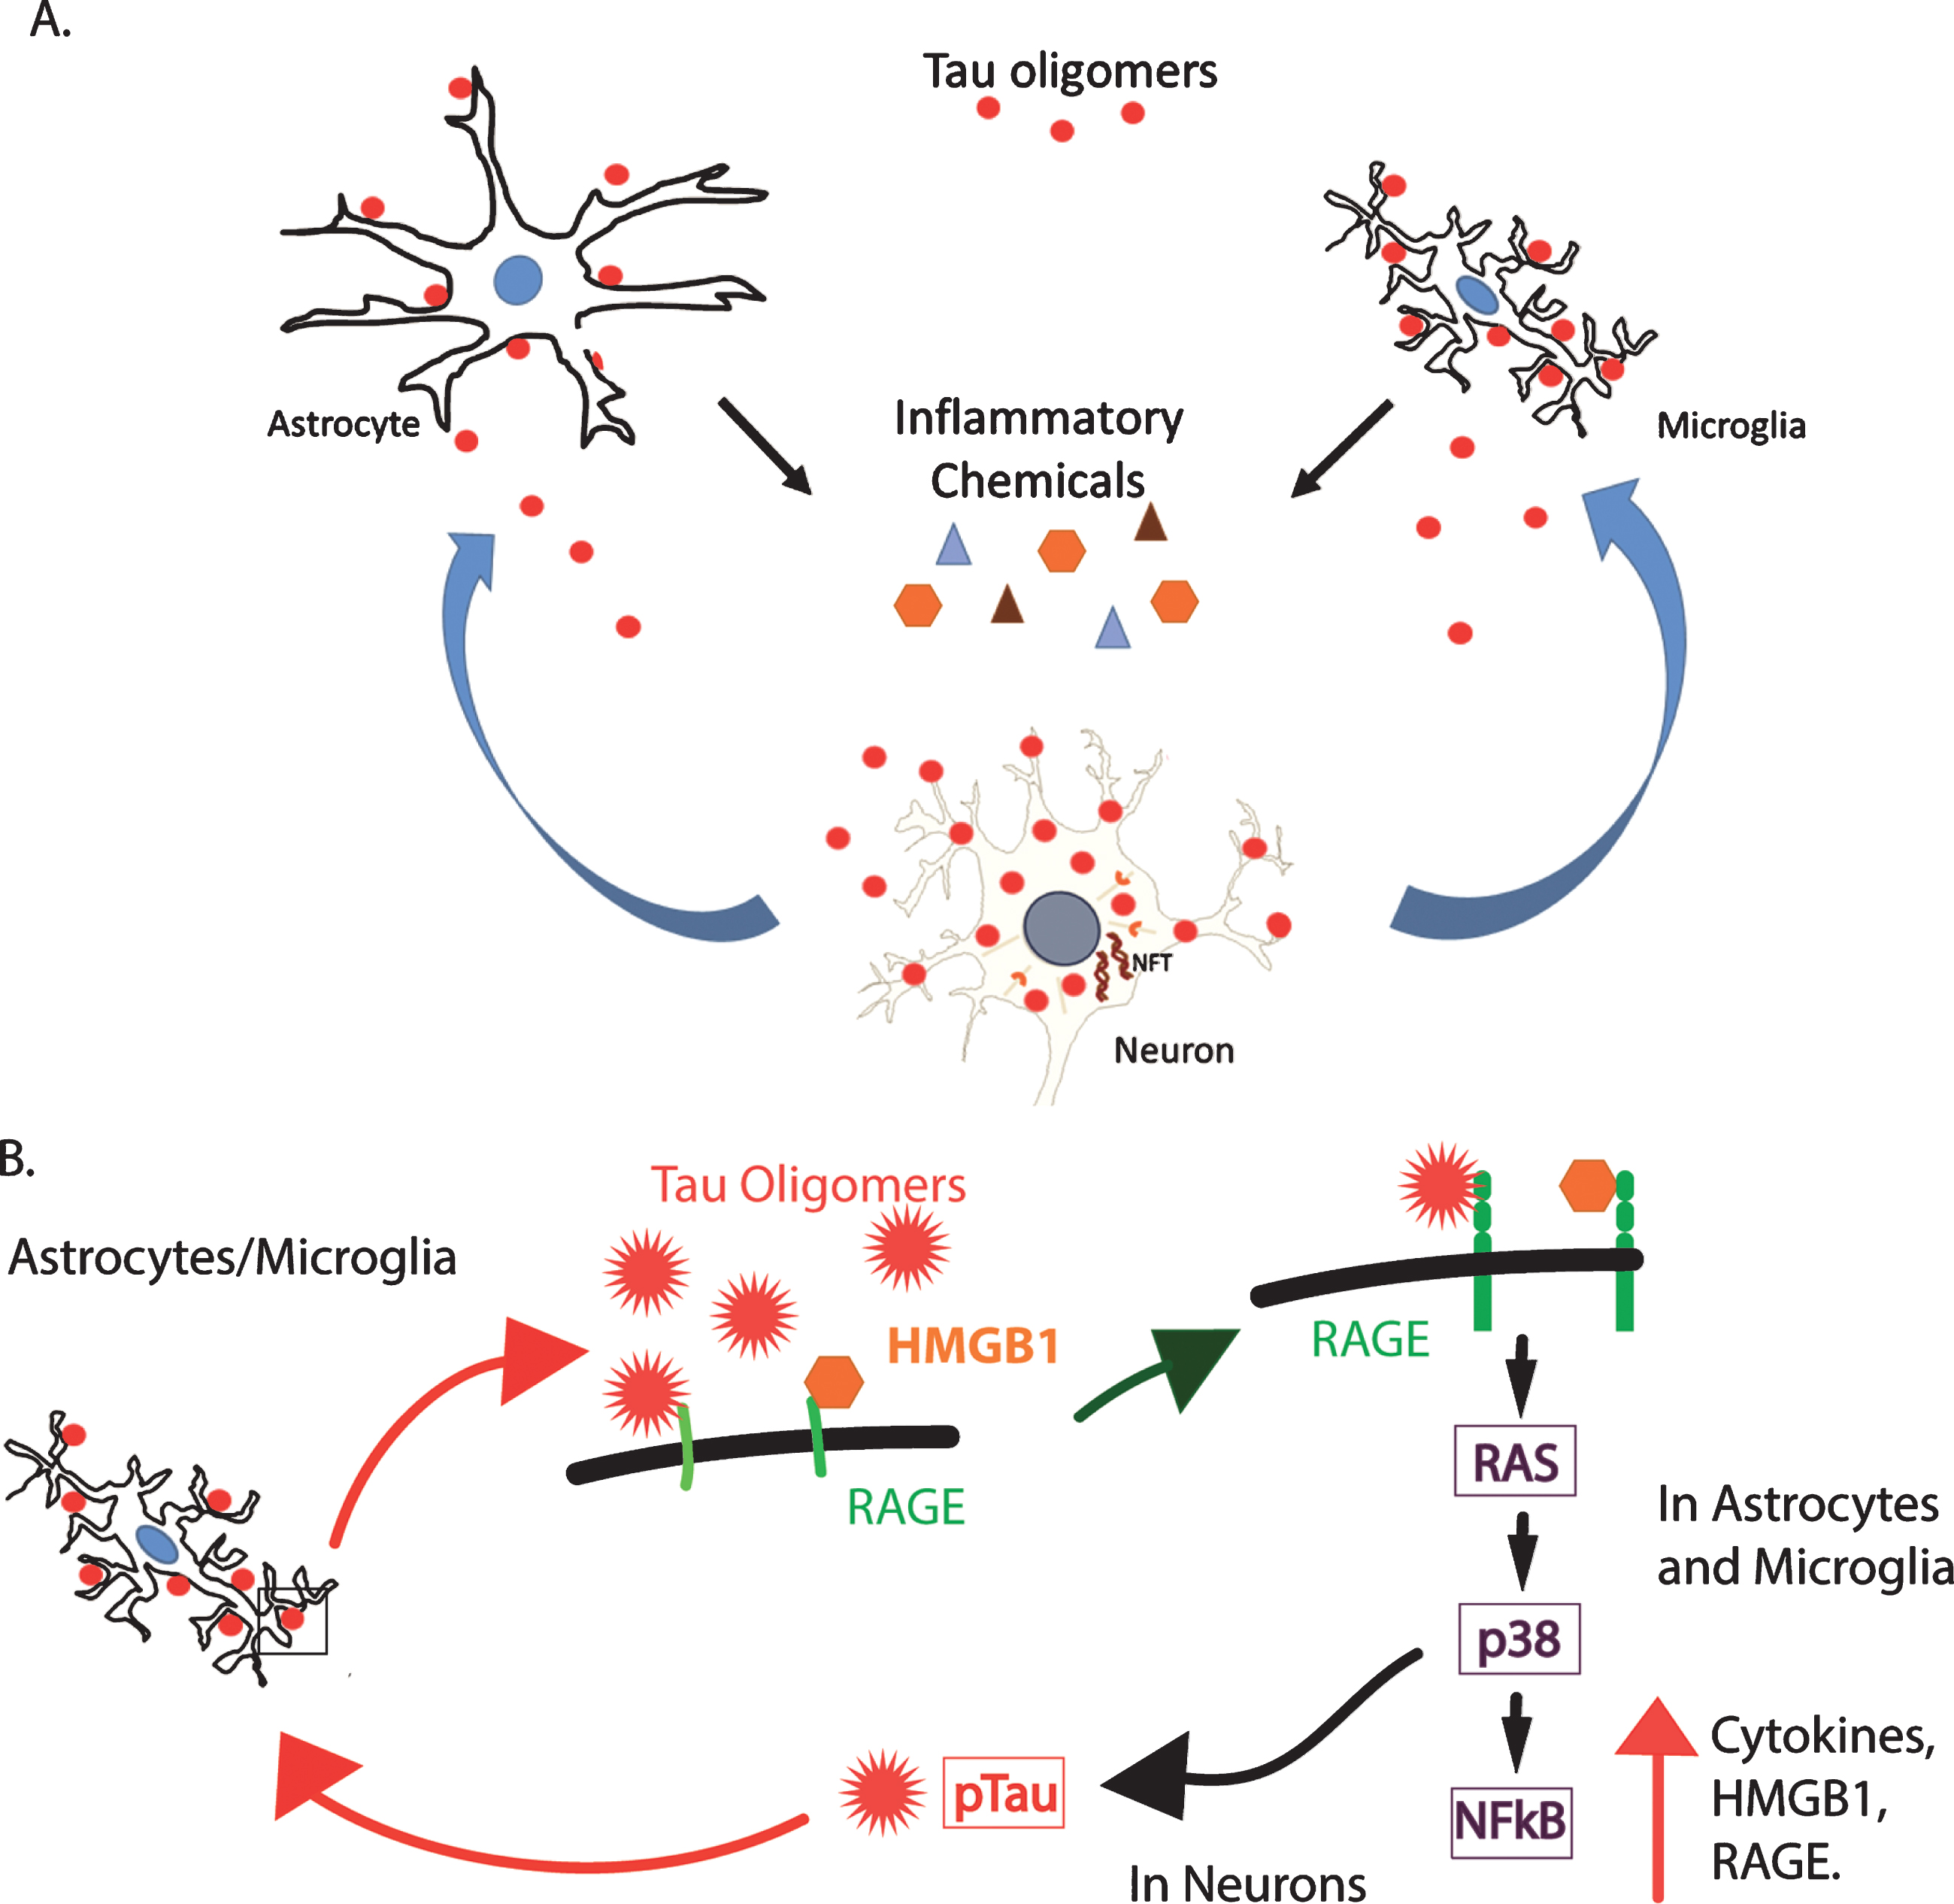 A hypothetical model of the toxic relationship between tau oligomers and inflammation. A) Tau oligomers can spread from brain region to brain region, potentially triggering inflammation and the secretion of pro-inflammatory cytokines by interacting with astrocytes and microglia. The inflammation may become chronic, resulting in further damage to the neurons and in turn, increased inflammation and eventual cell death. B) RAGE, a potential receptor for tau oligomers, signals NFκB through several pathways including through RAS and p38. This increases the production of both RAGE and its ligand, HMGB1, initiating a feed-forward mechanism producing a state of chronic inflammation. Additionally, p38 is known to phosphorylate tau and may increase the abundance of hyperphosphorylated tau, which is more prone to aggregate into oligomers. This may, in turn, induce more inflammation through the production of more oligomers.